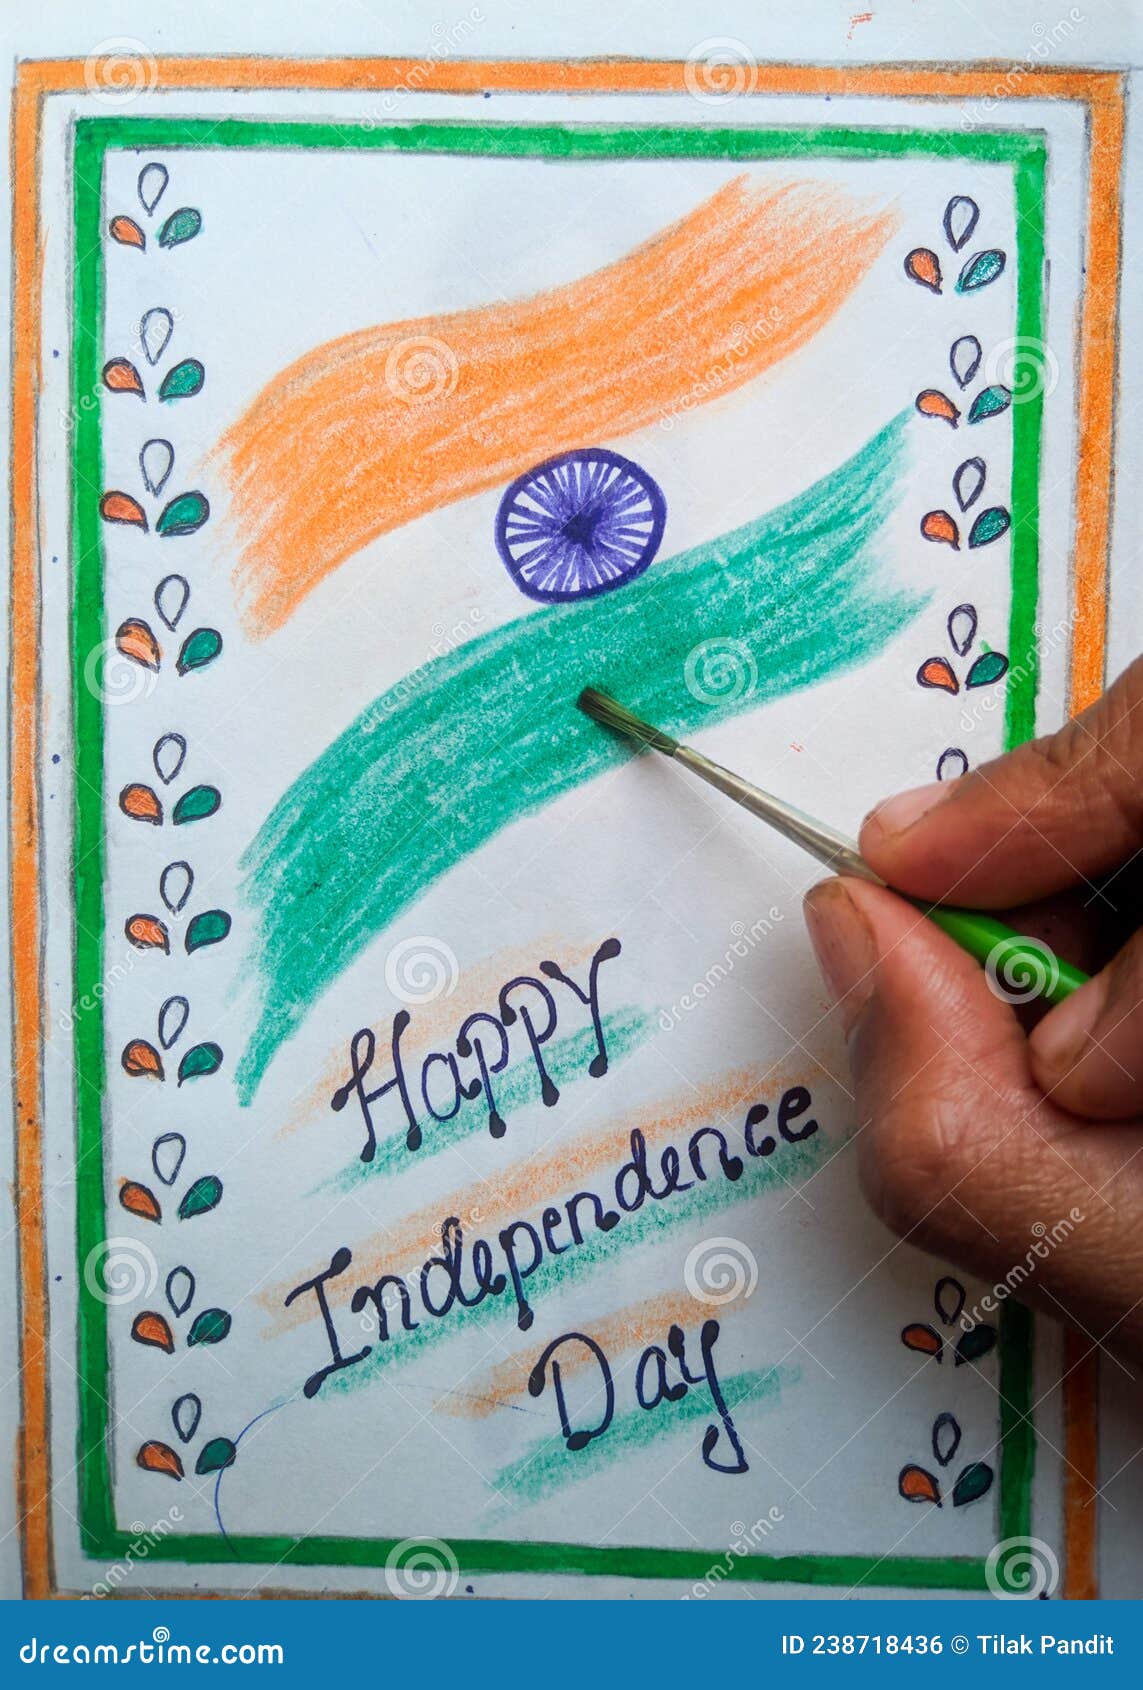 75th Independence day easy drawing | Independence day special | 15th august  drawing for competition - YouTube